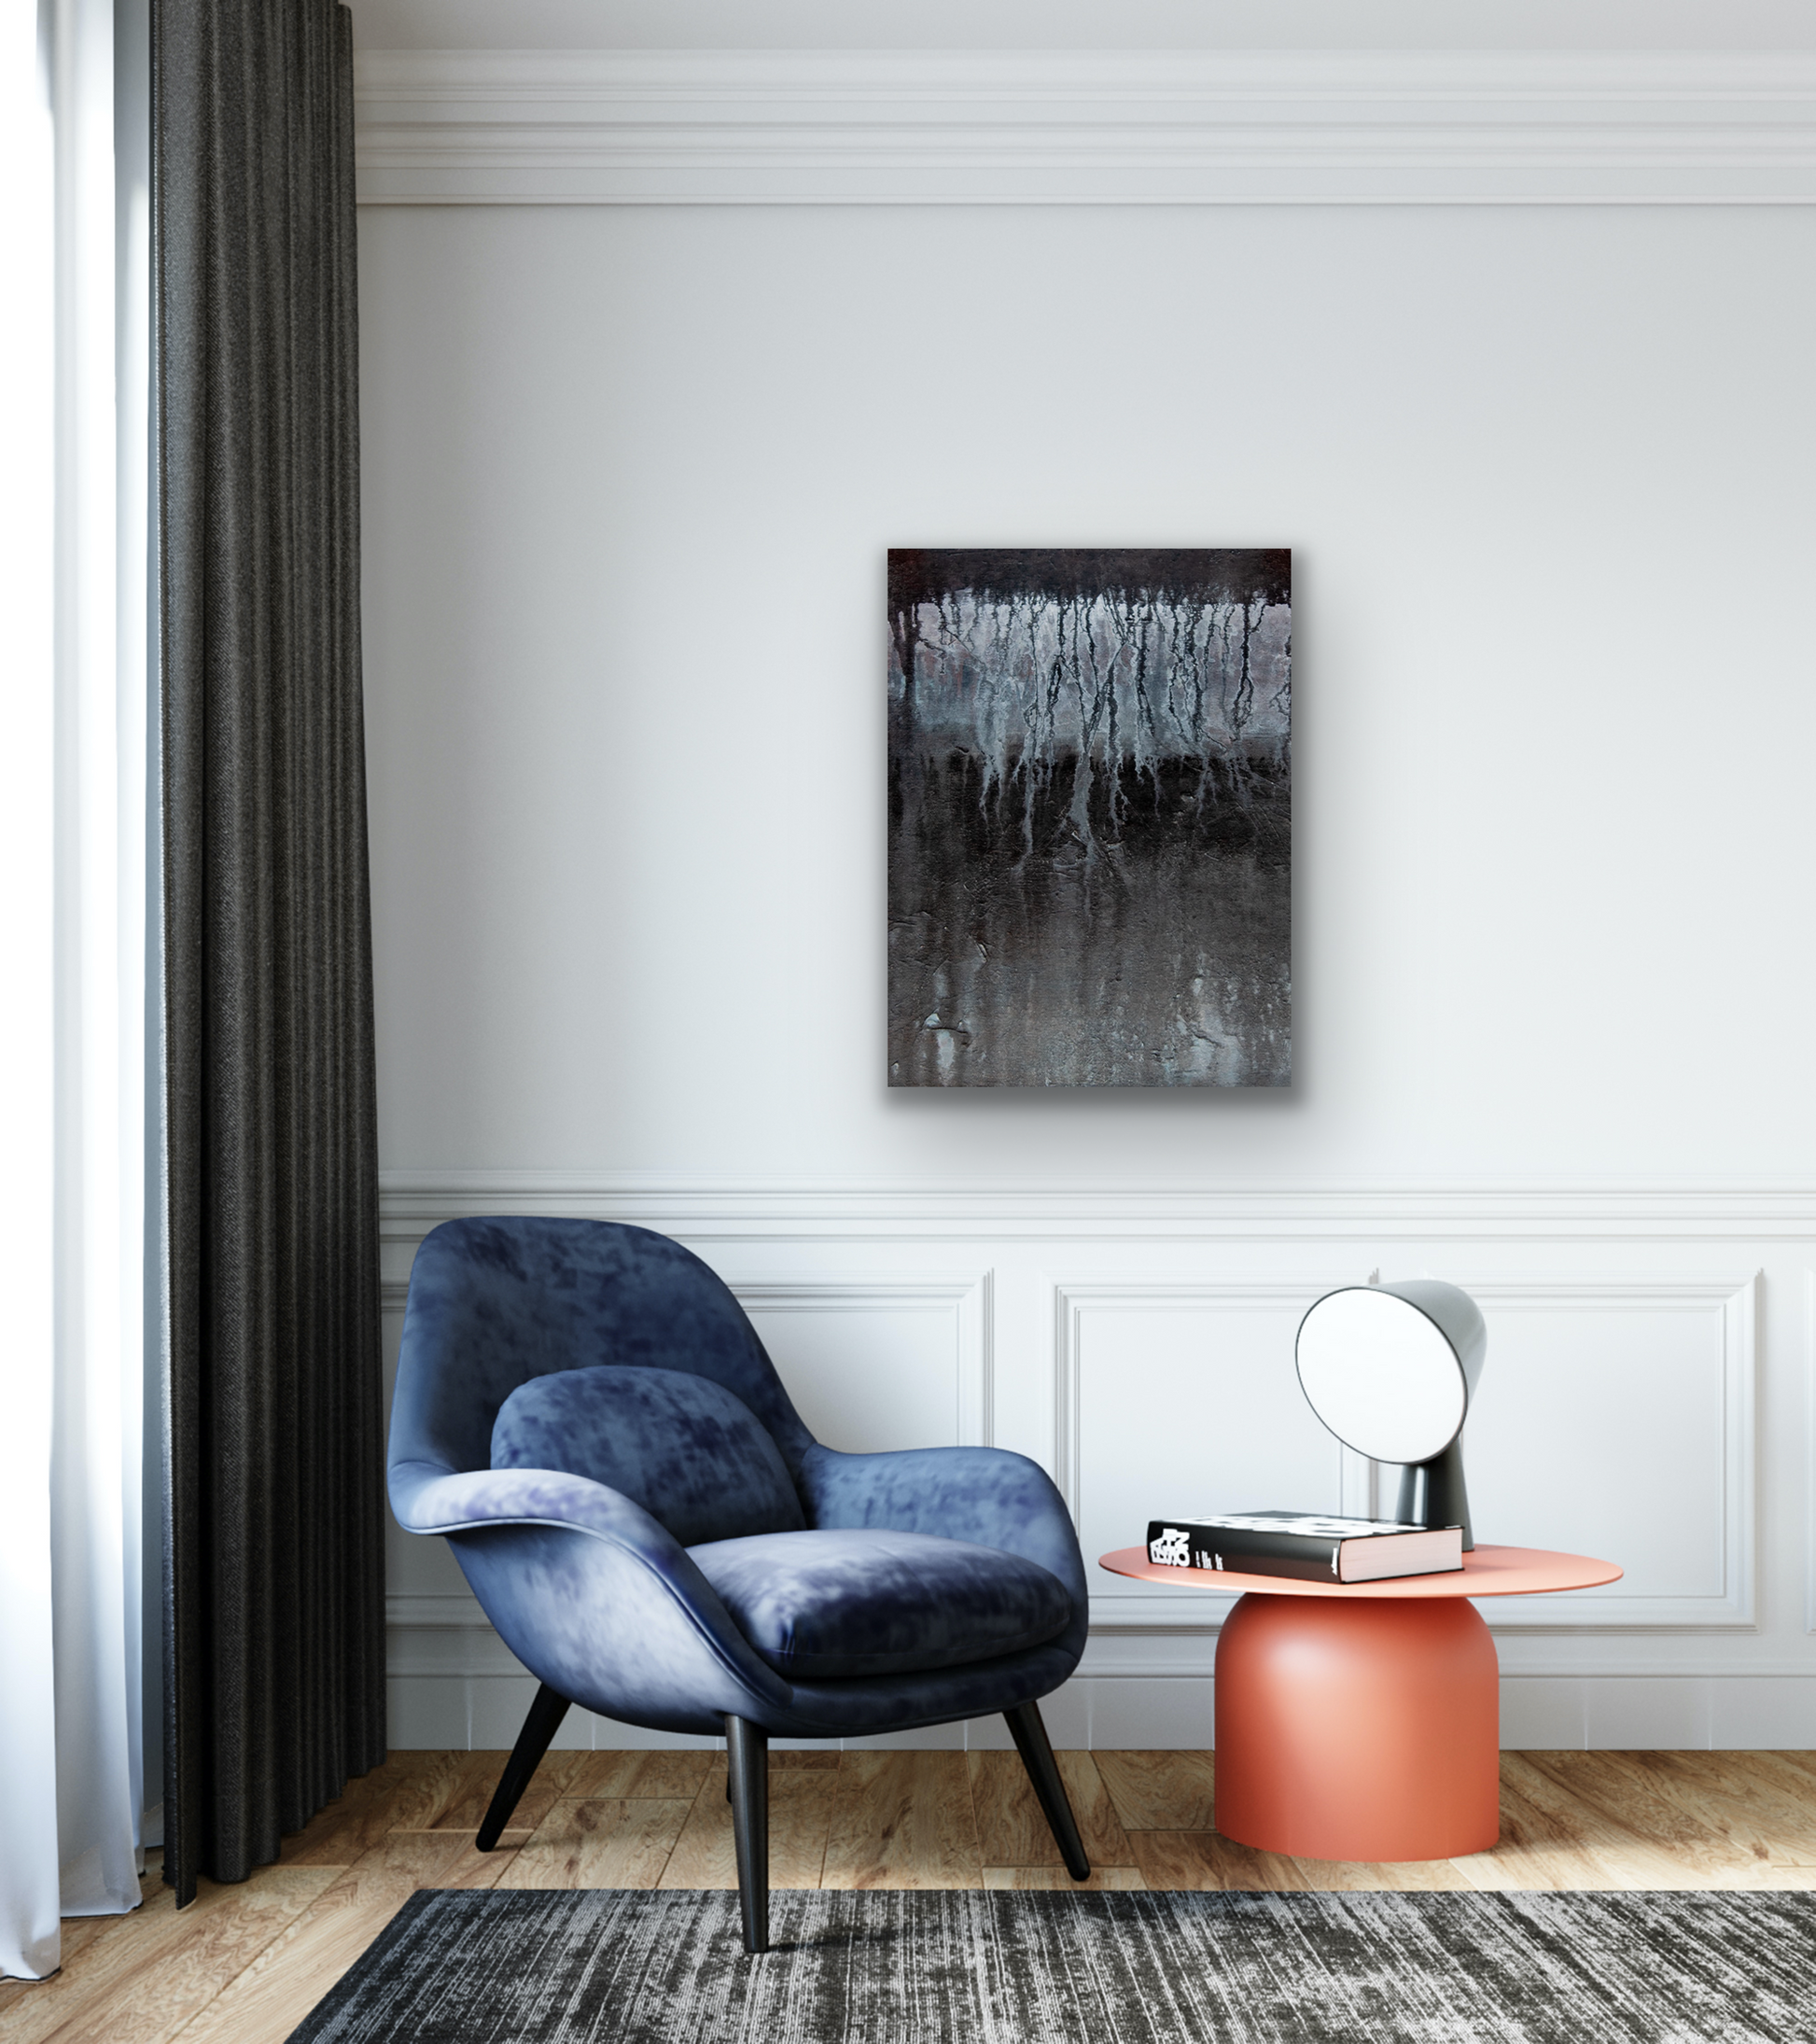 Depth is for the discerning art collector looking to make a statement.  This art work is suited for a hallway, living room, dining room or even a bedroom where it can be focal point of the room.